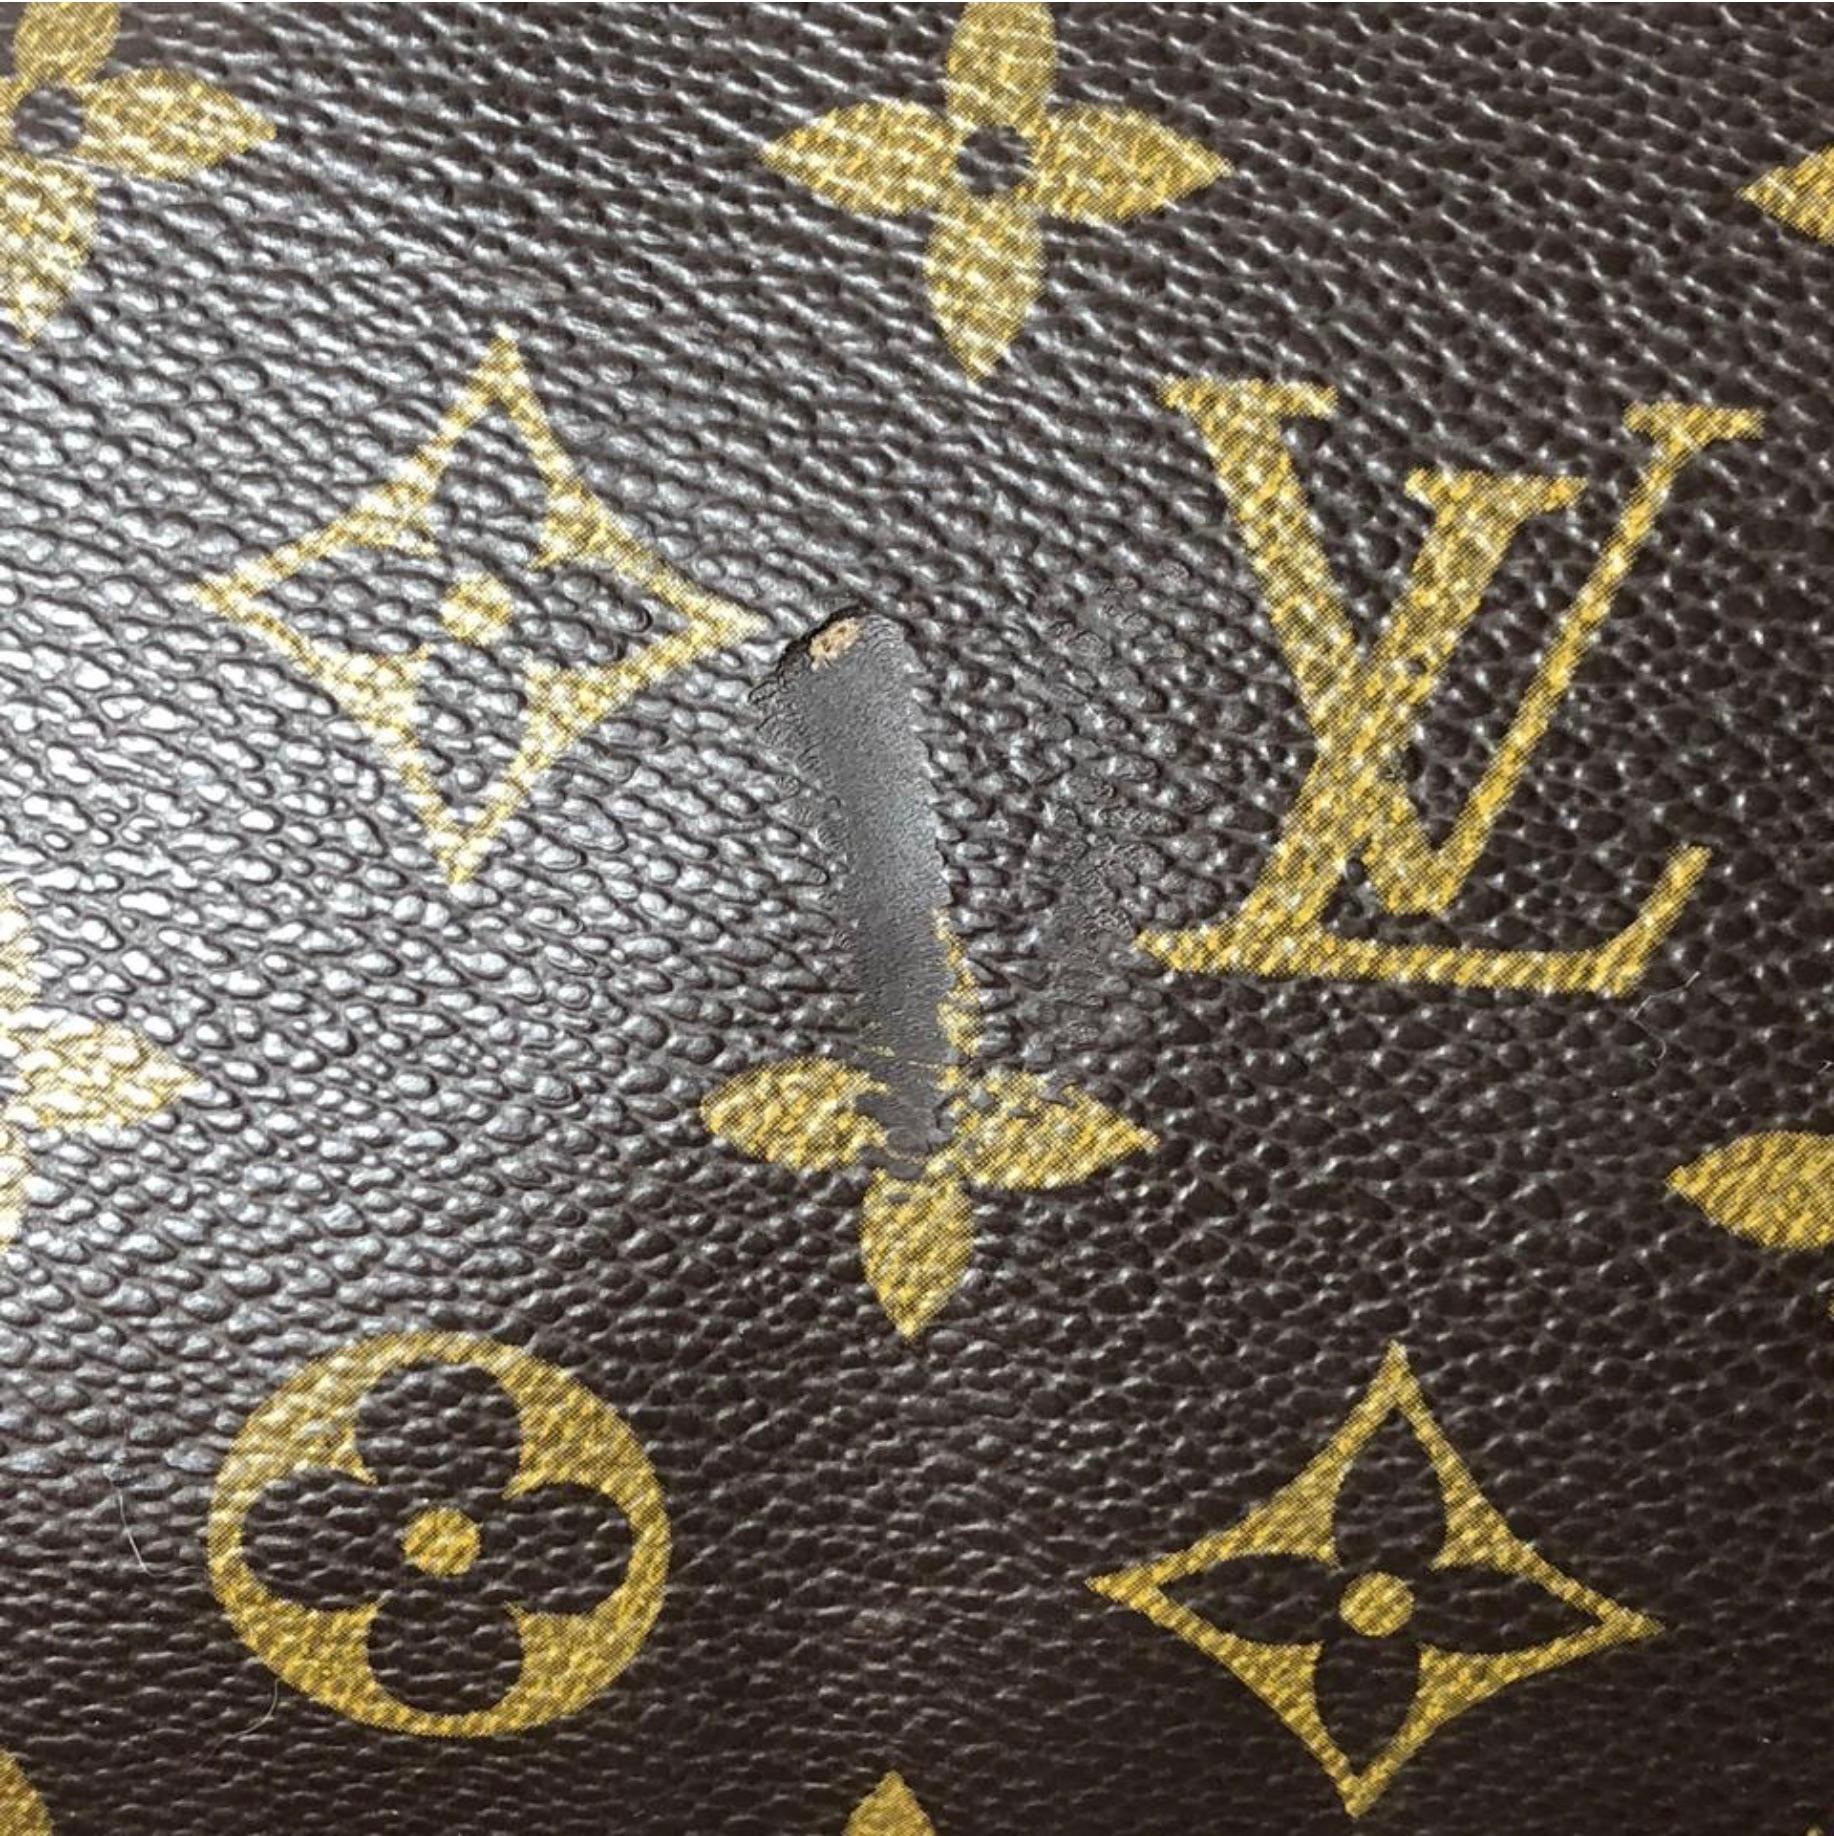  Louis Vuitton Monogram Keepall 50 Travel Bag In Good Condition For Sale In Saint Charles, IL